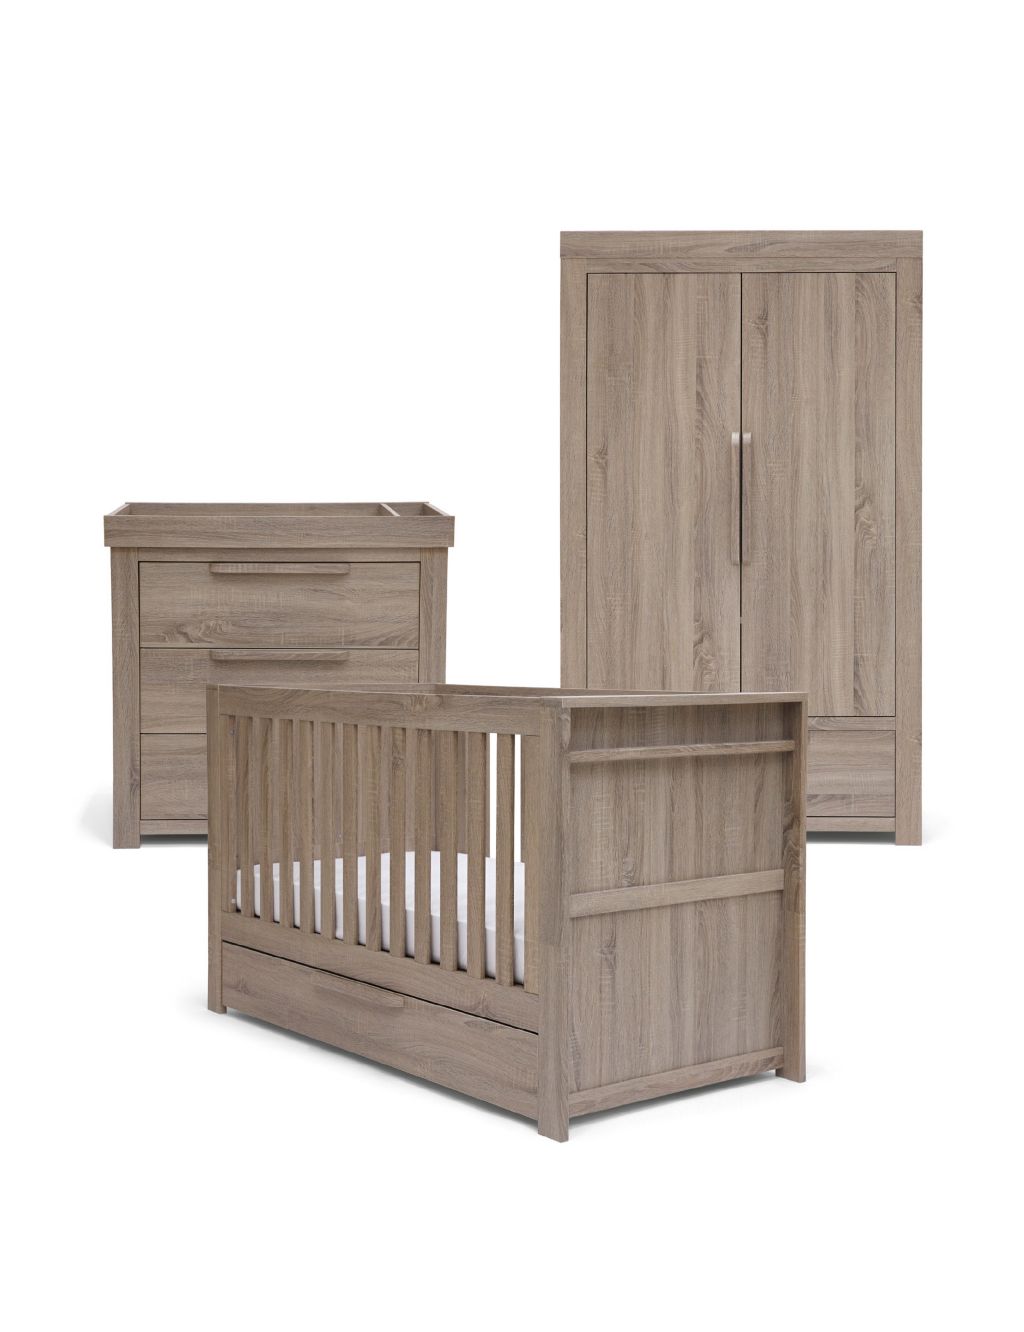 Franklin 3 Piece Cotbed Range with Dresser and Wardrobe image 1